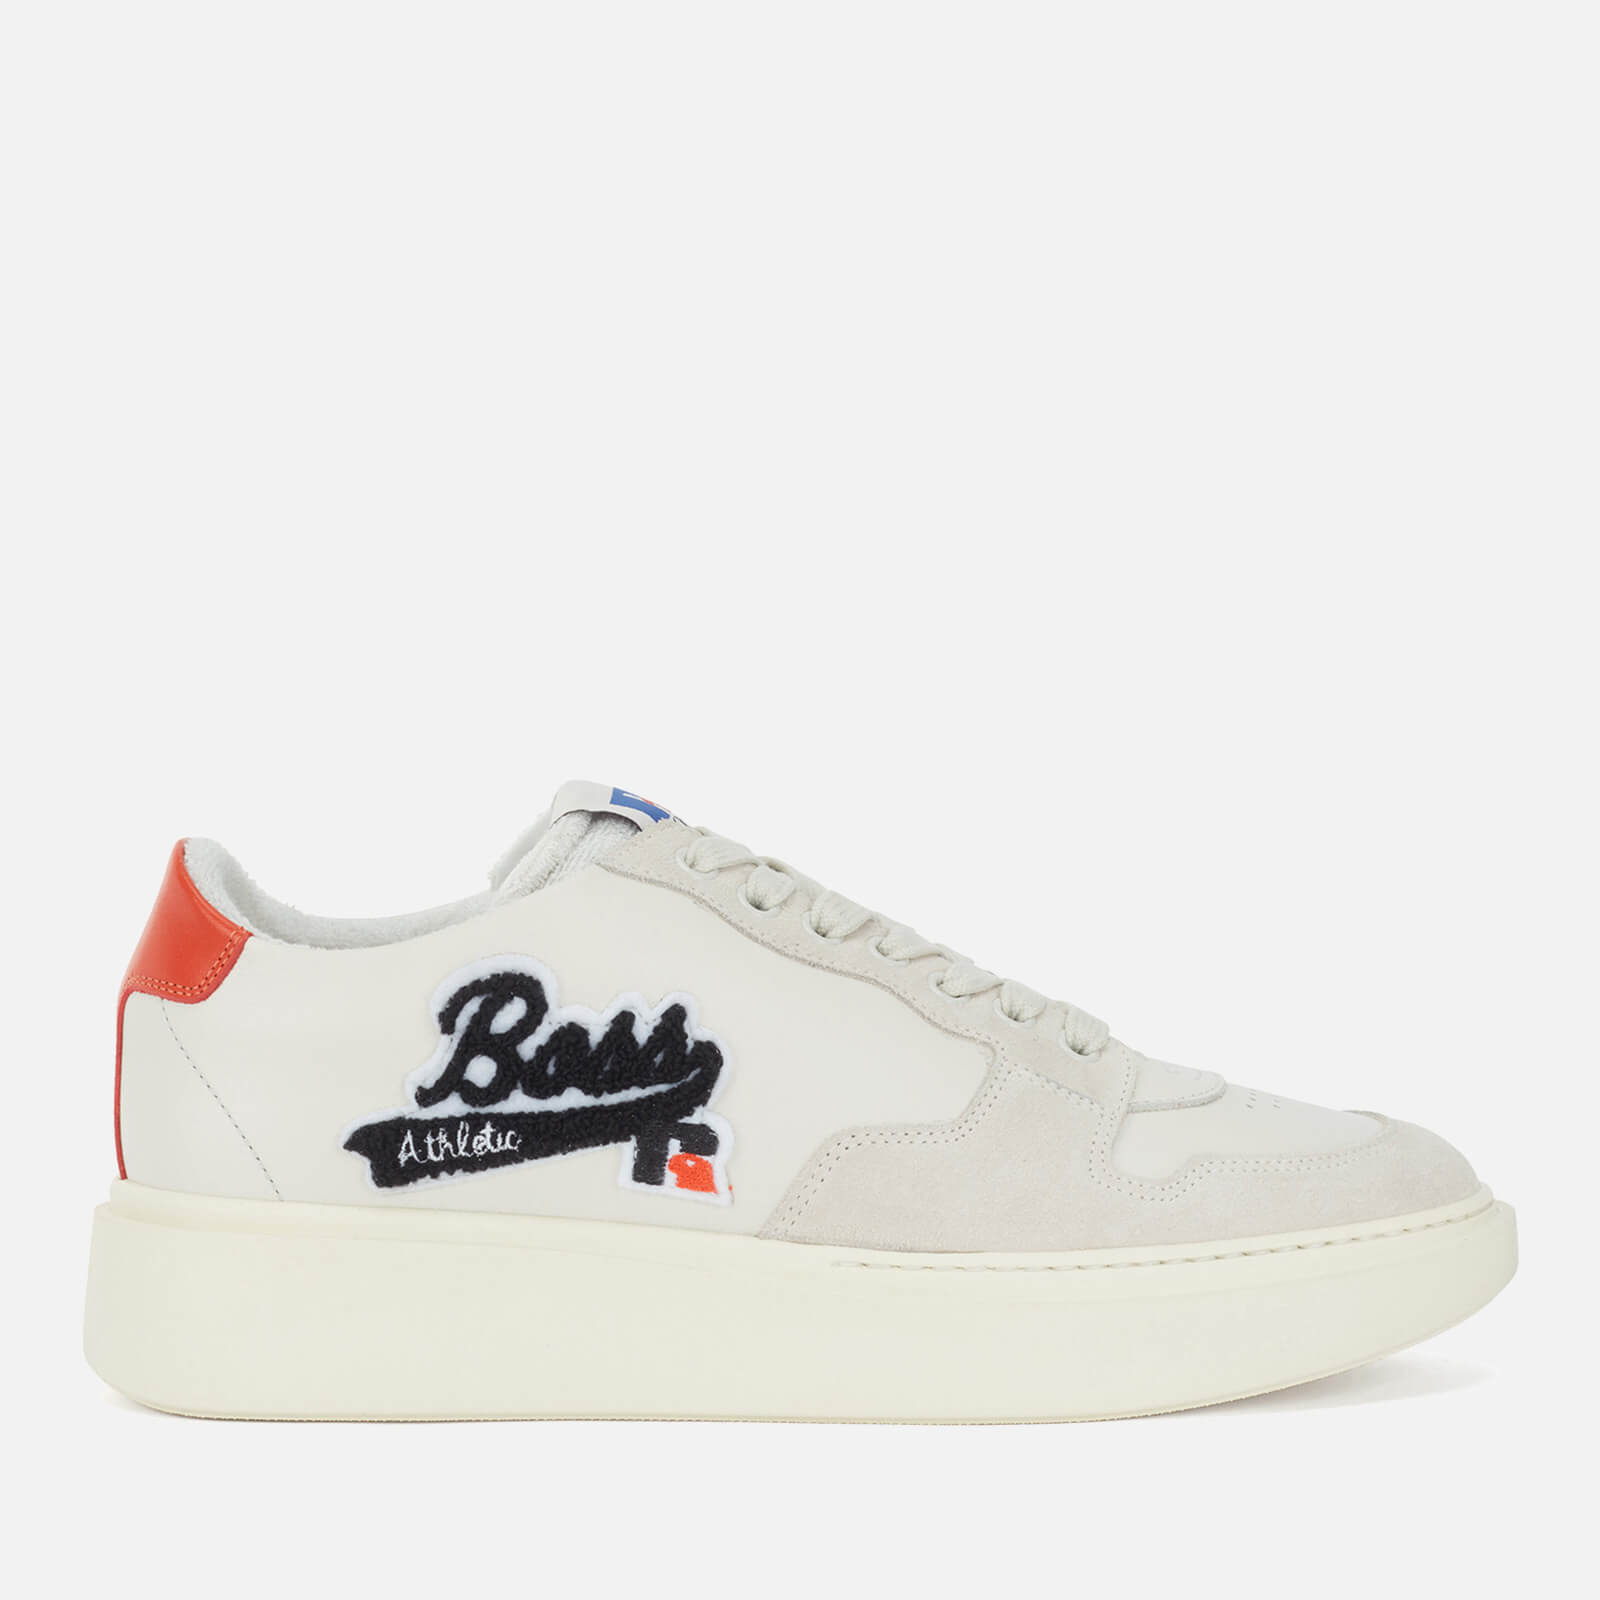 BOSS X Russell Athletic Women's Amber Logo Low Top Trainers - Open White - UK 3